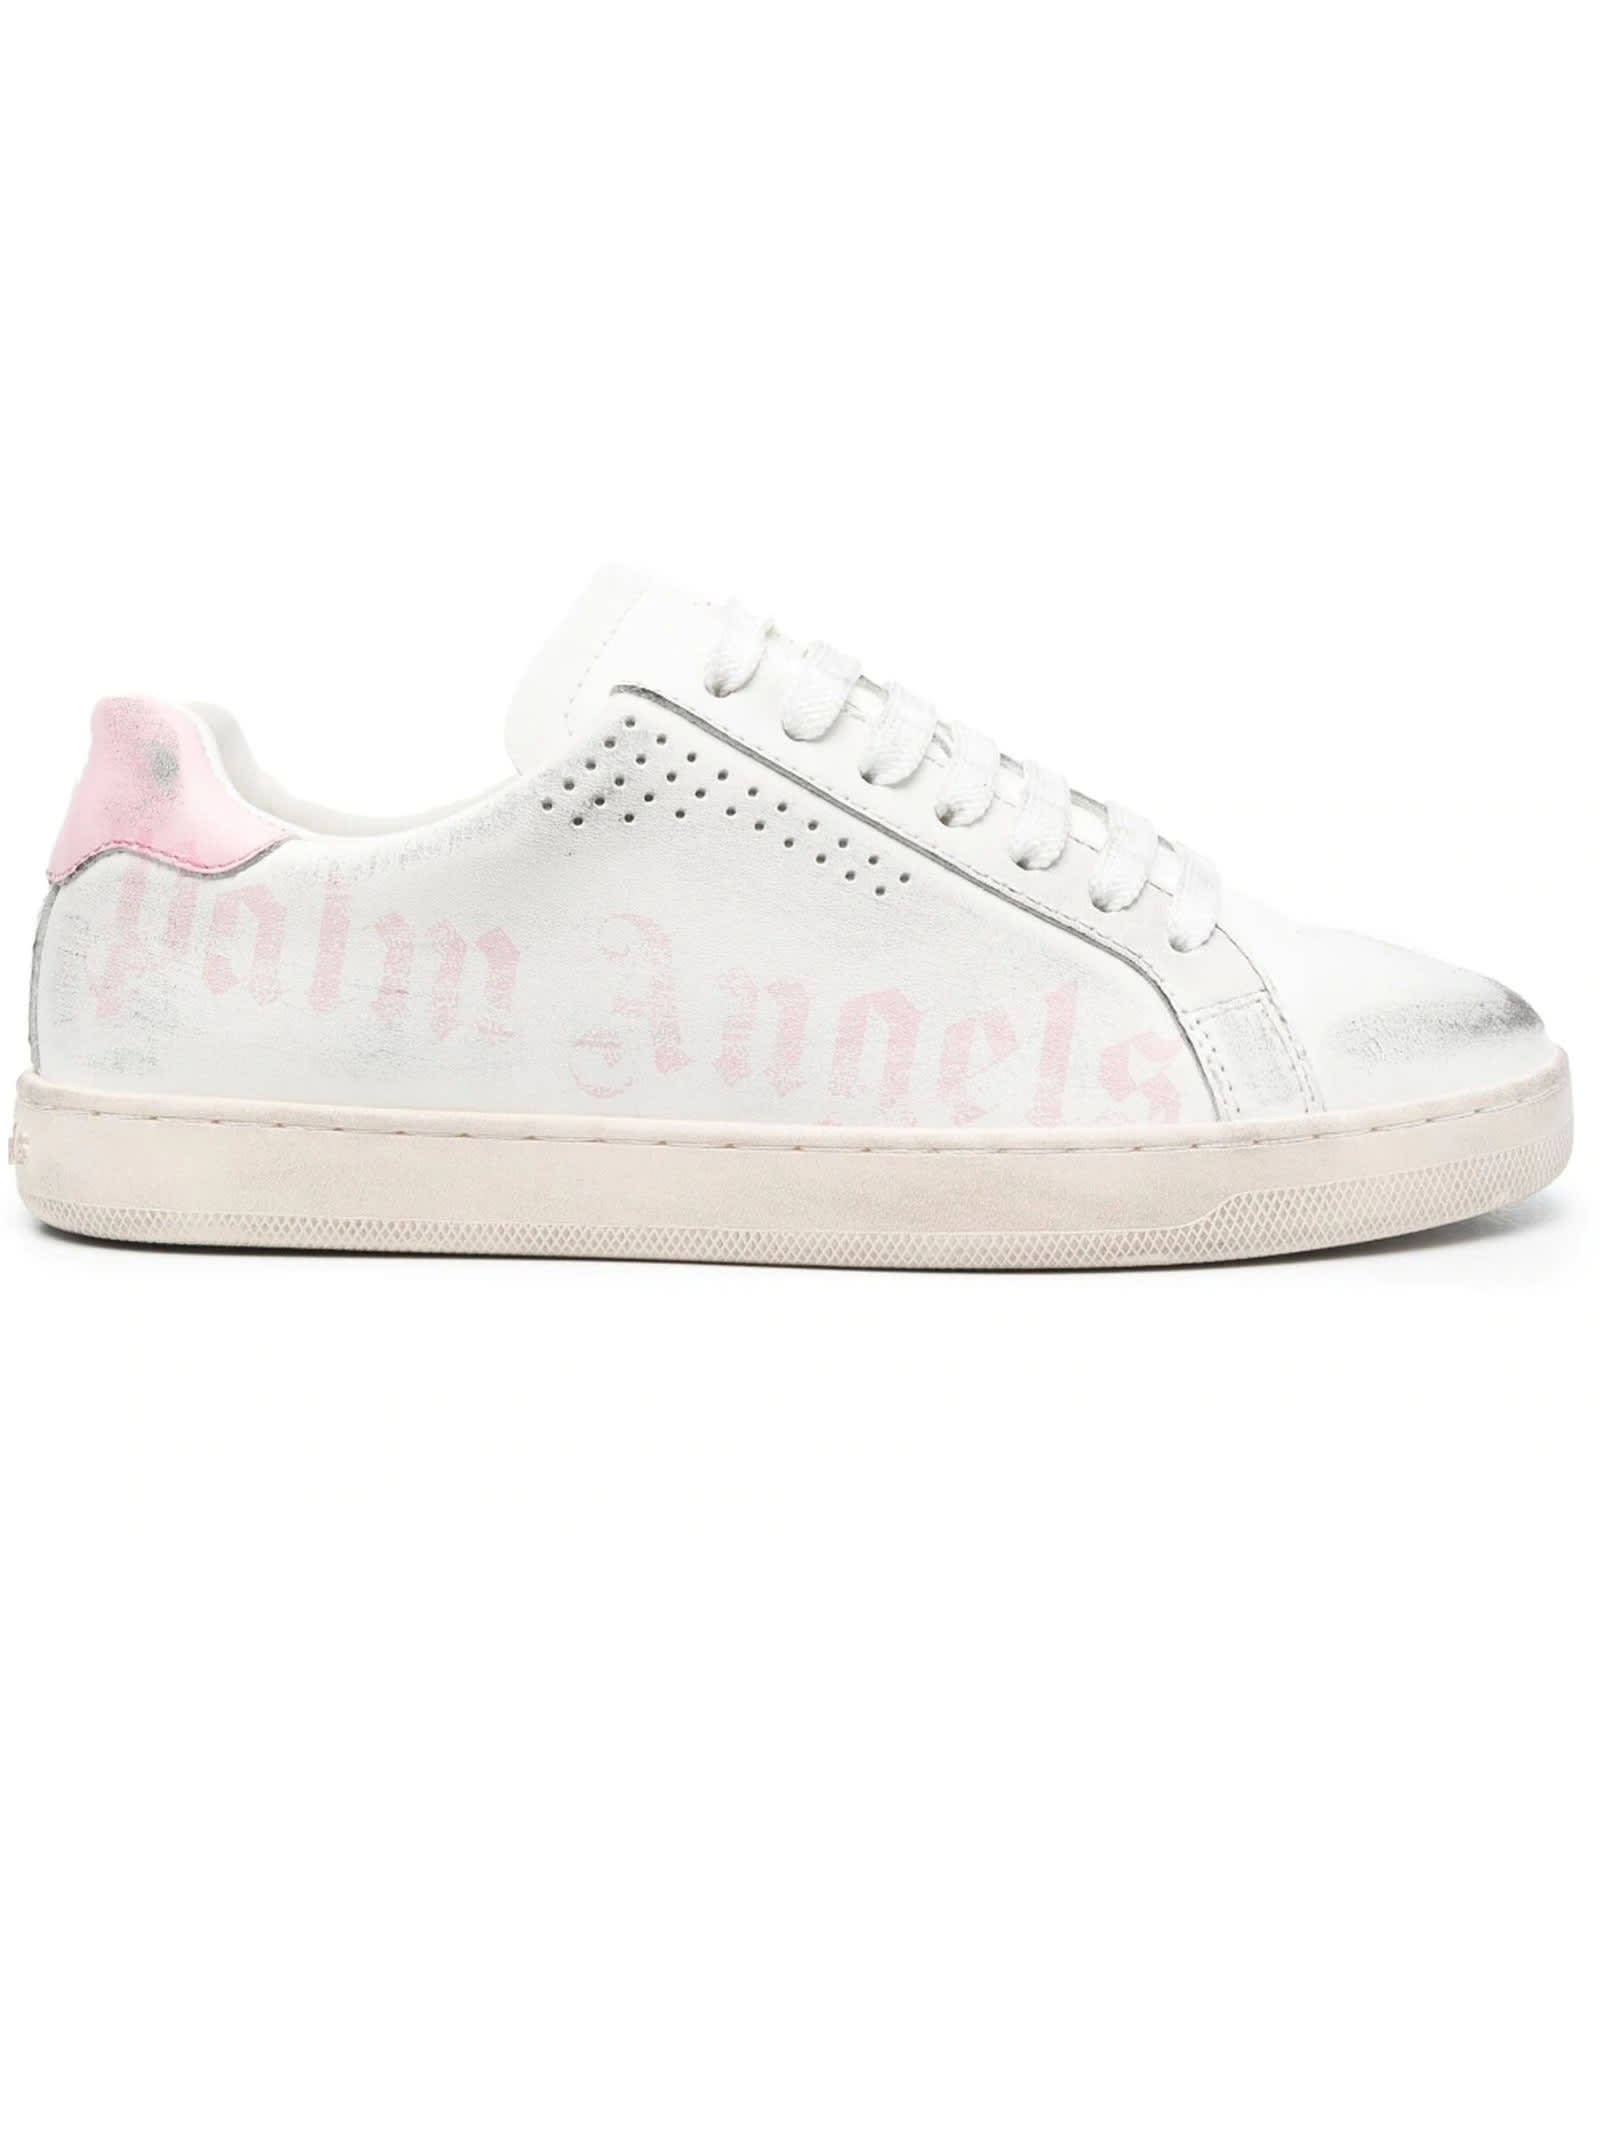 PALM ANGELS WHITE CALFSKIN SNEAKERS